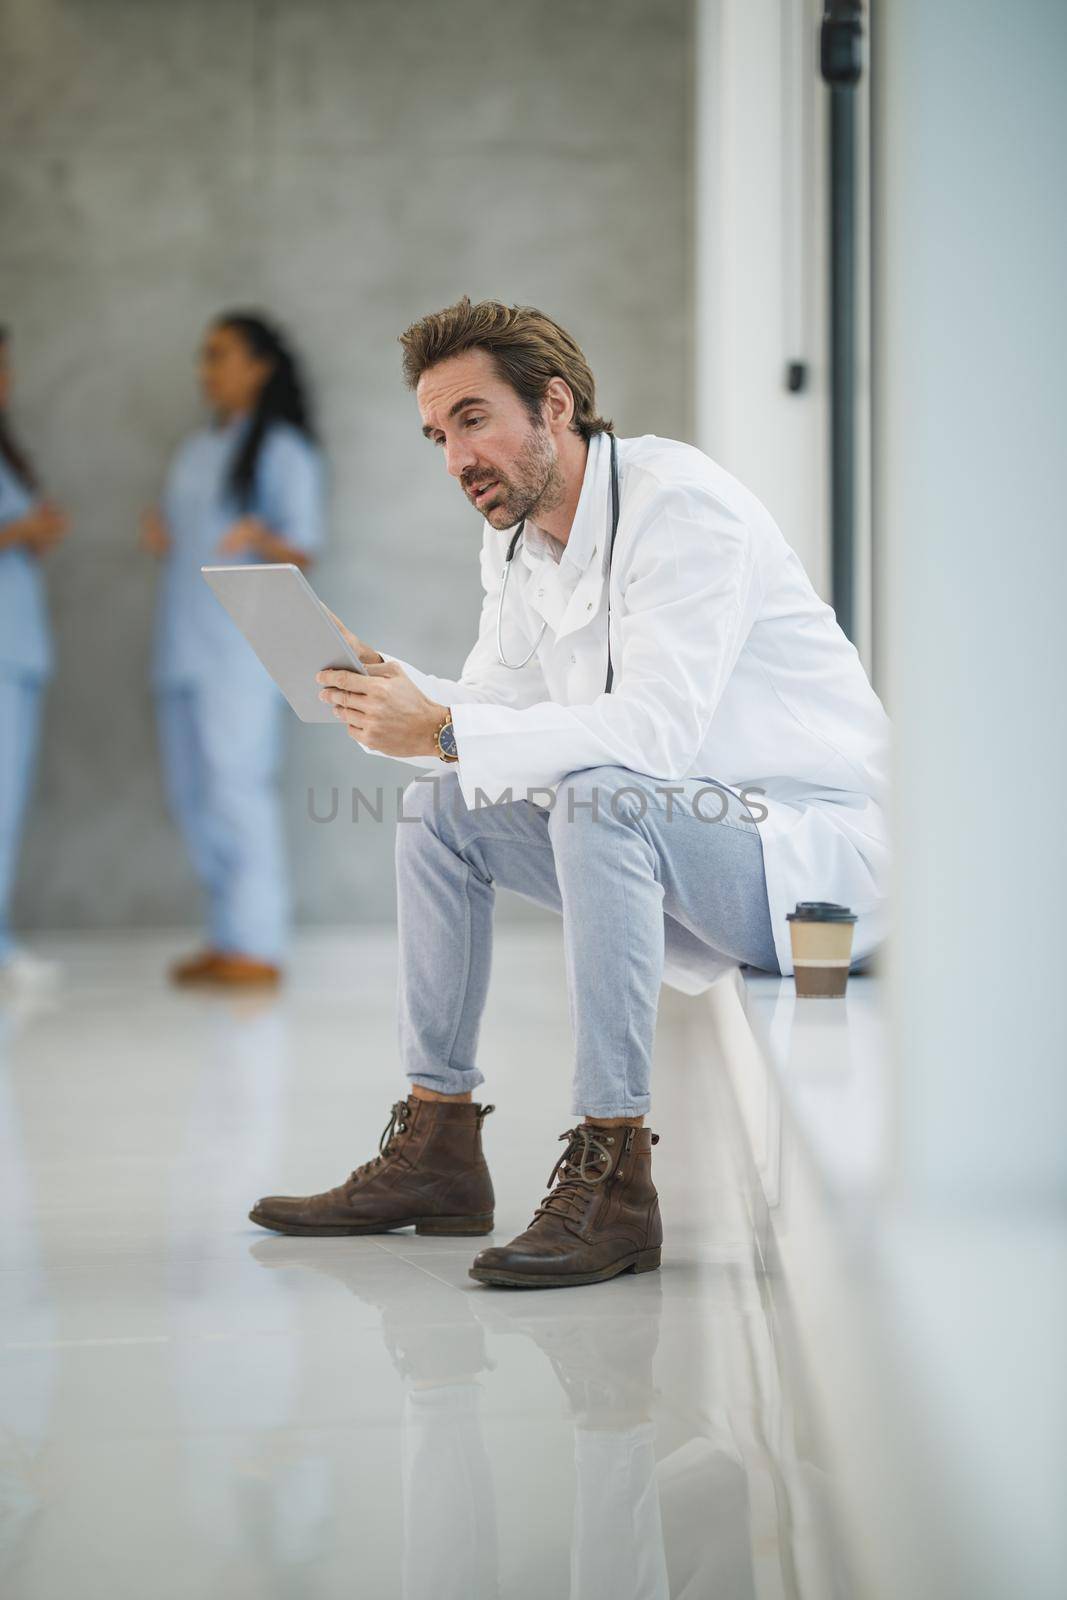 Shot of a mature doctor using digital tablet while sitting near a window in a hospital hallway during the Covid-19 pandemic.